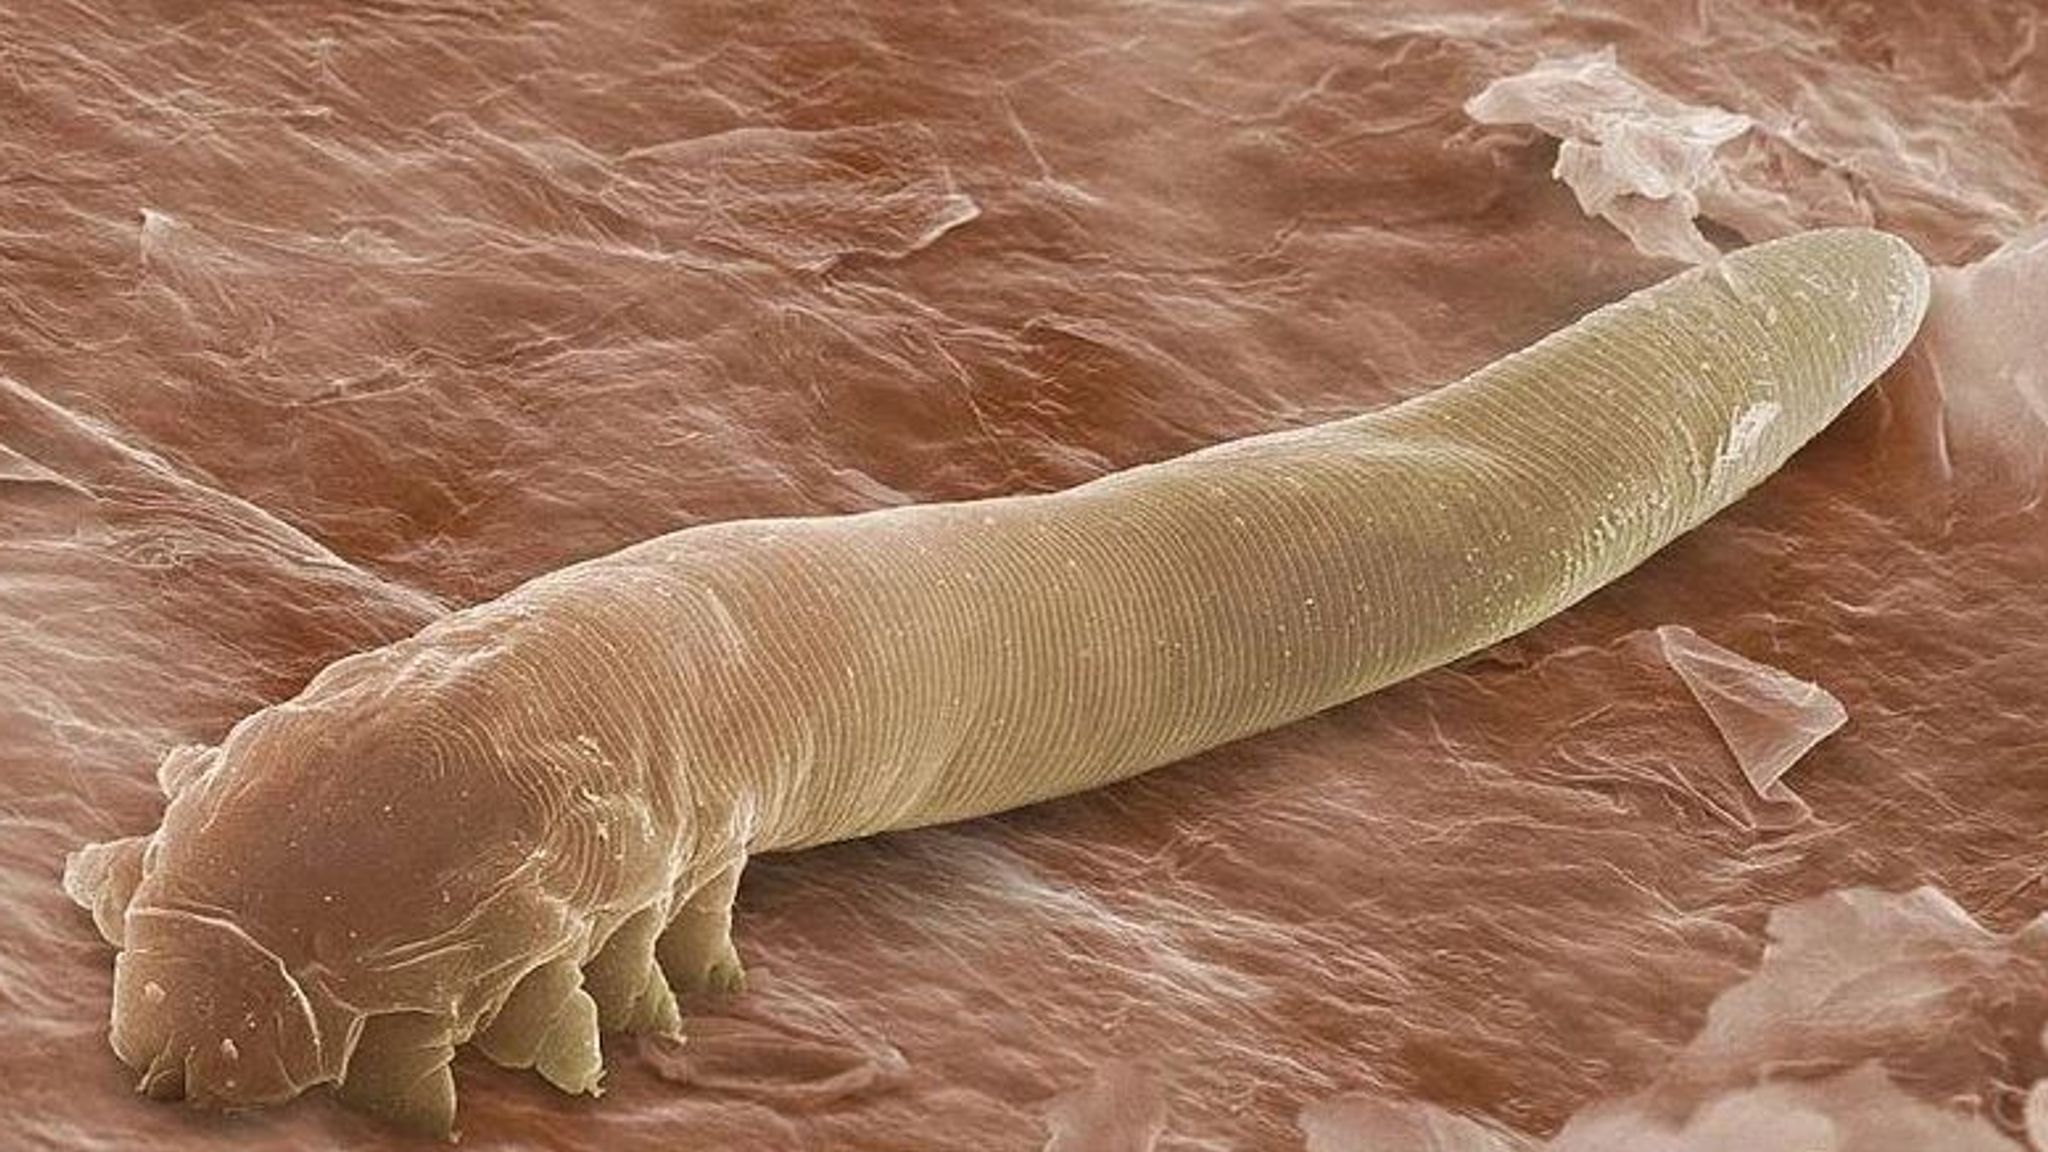 Microscopic Mites That Have Sex On Our Faces At Night Could Face